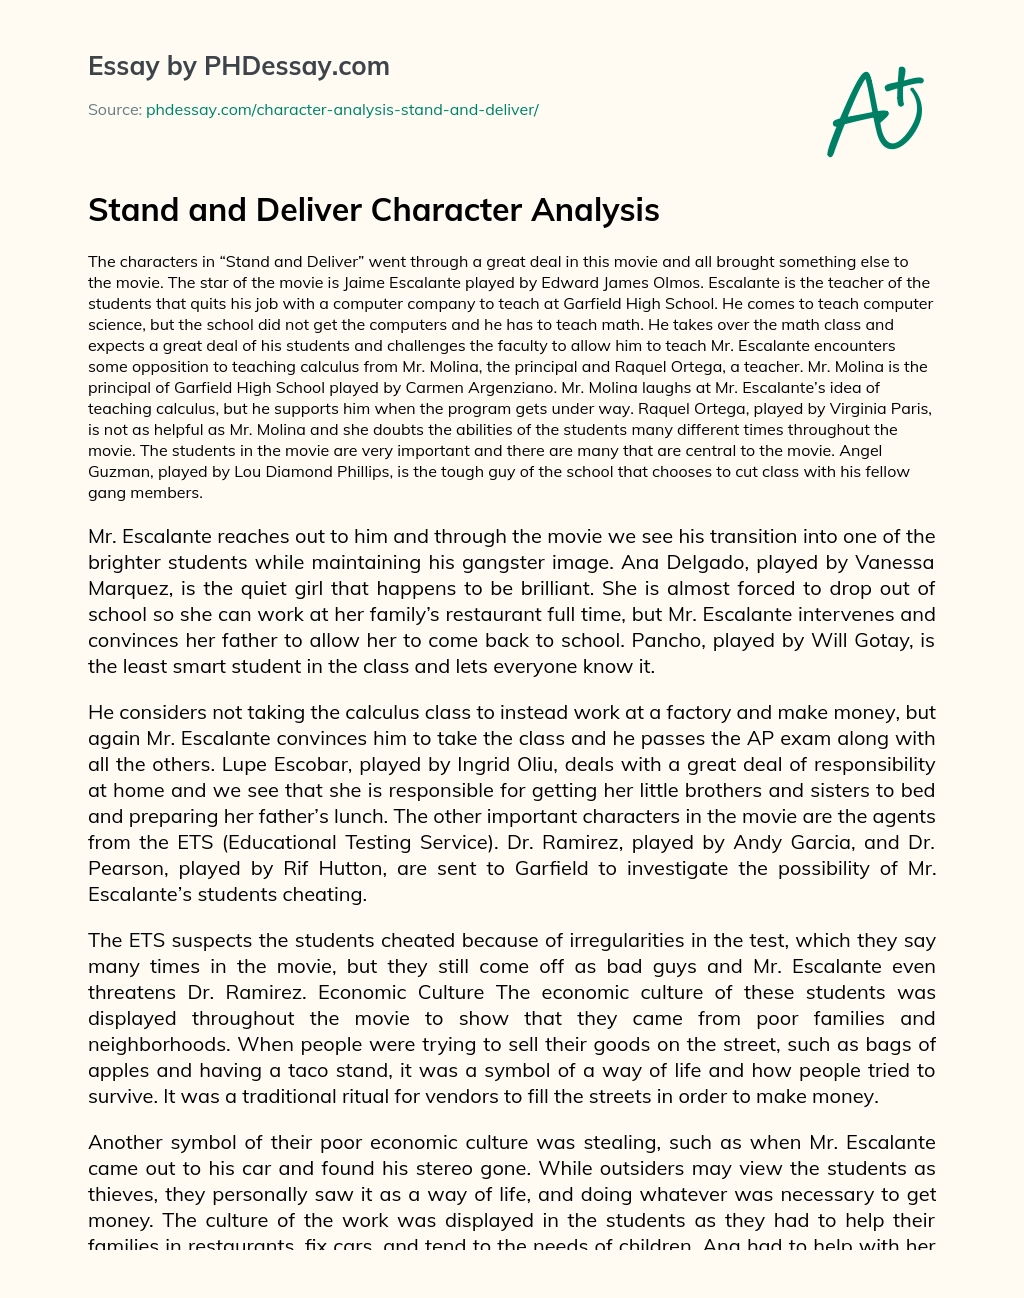 Stand and Deliver Character Analysis essay